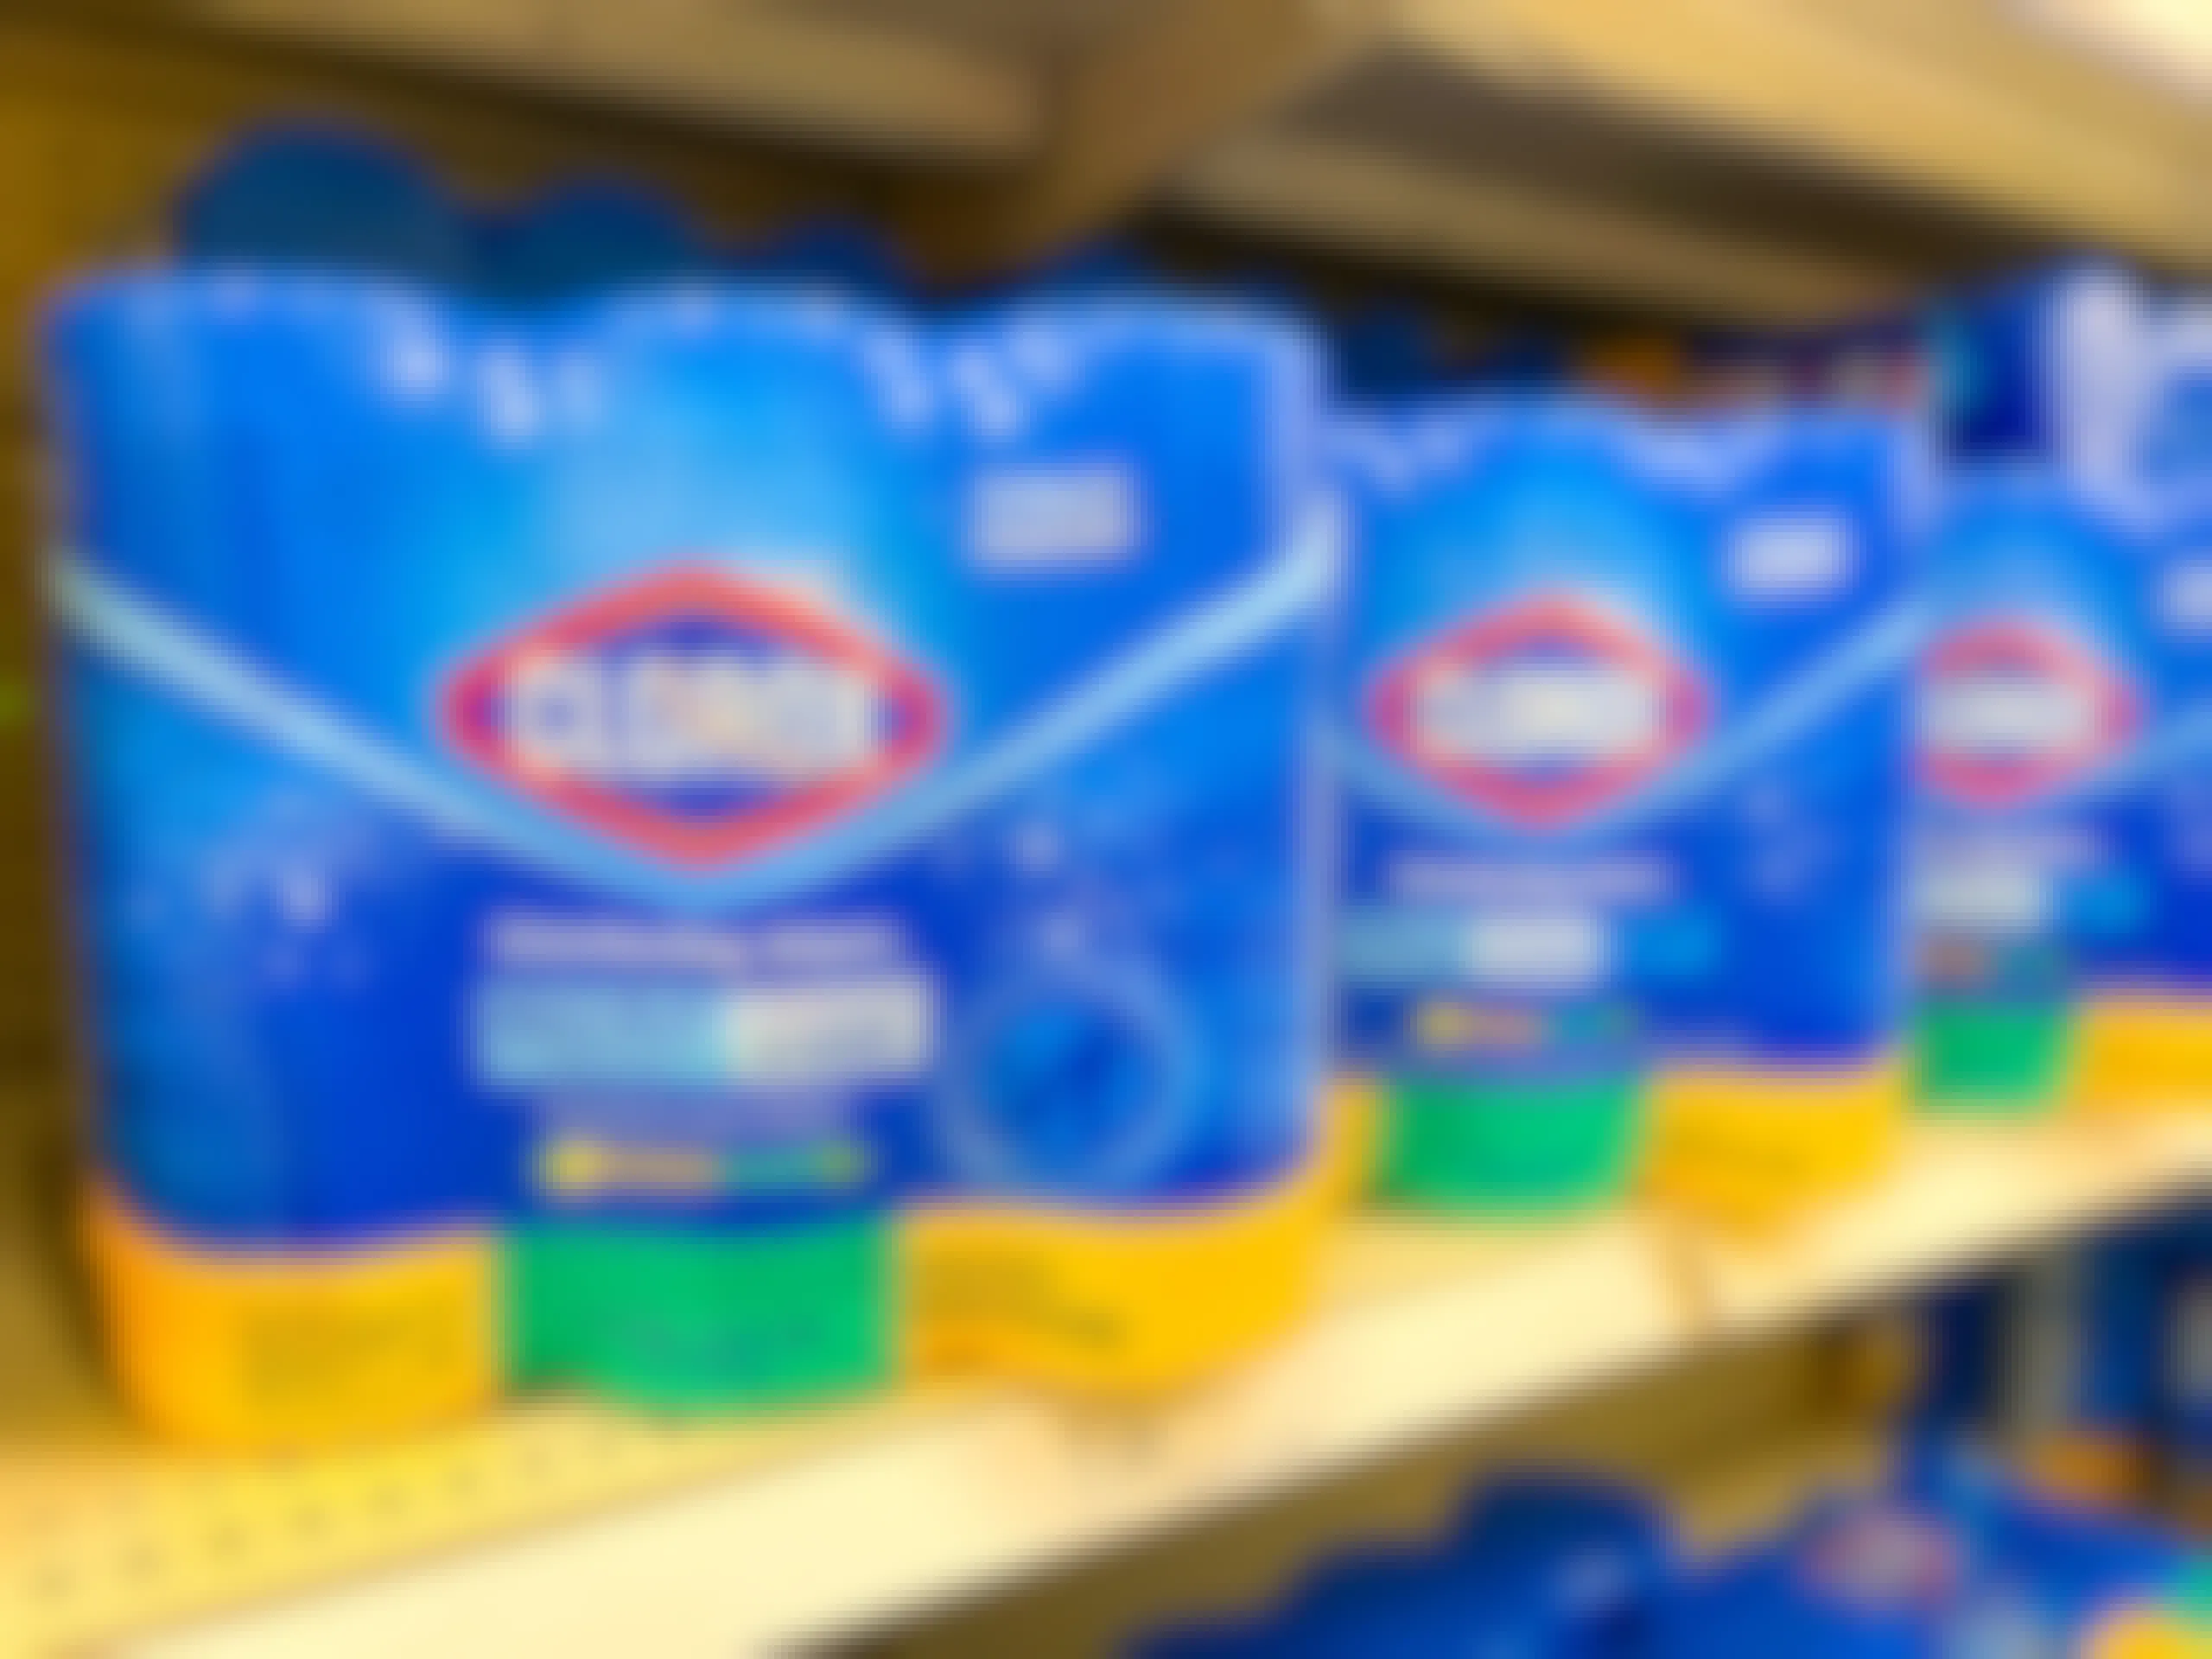 one 3-pack of Clorox disinfecting wipes on shelf